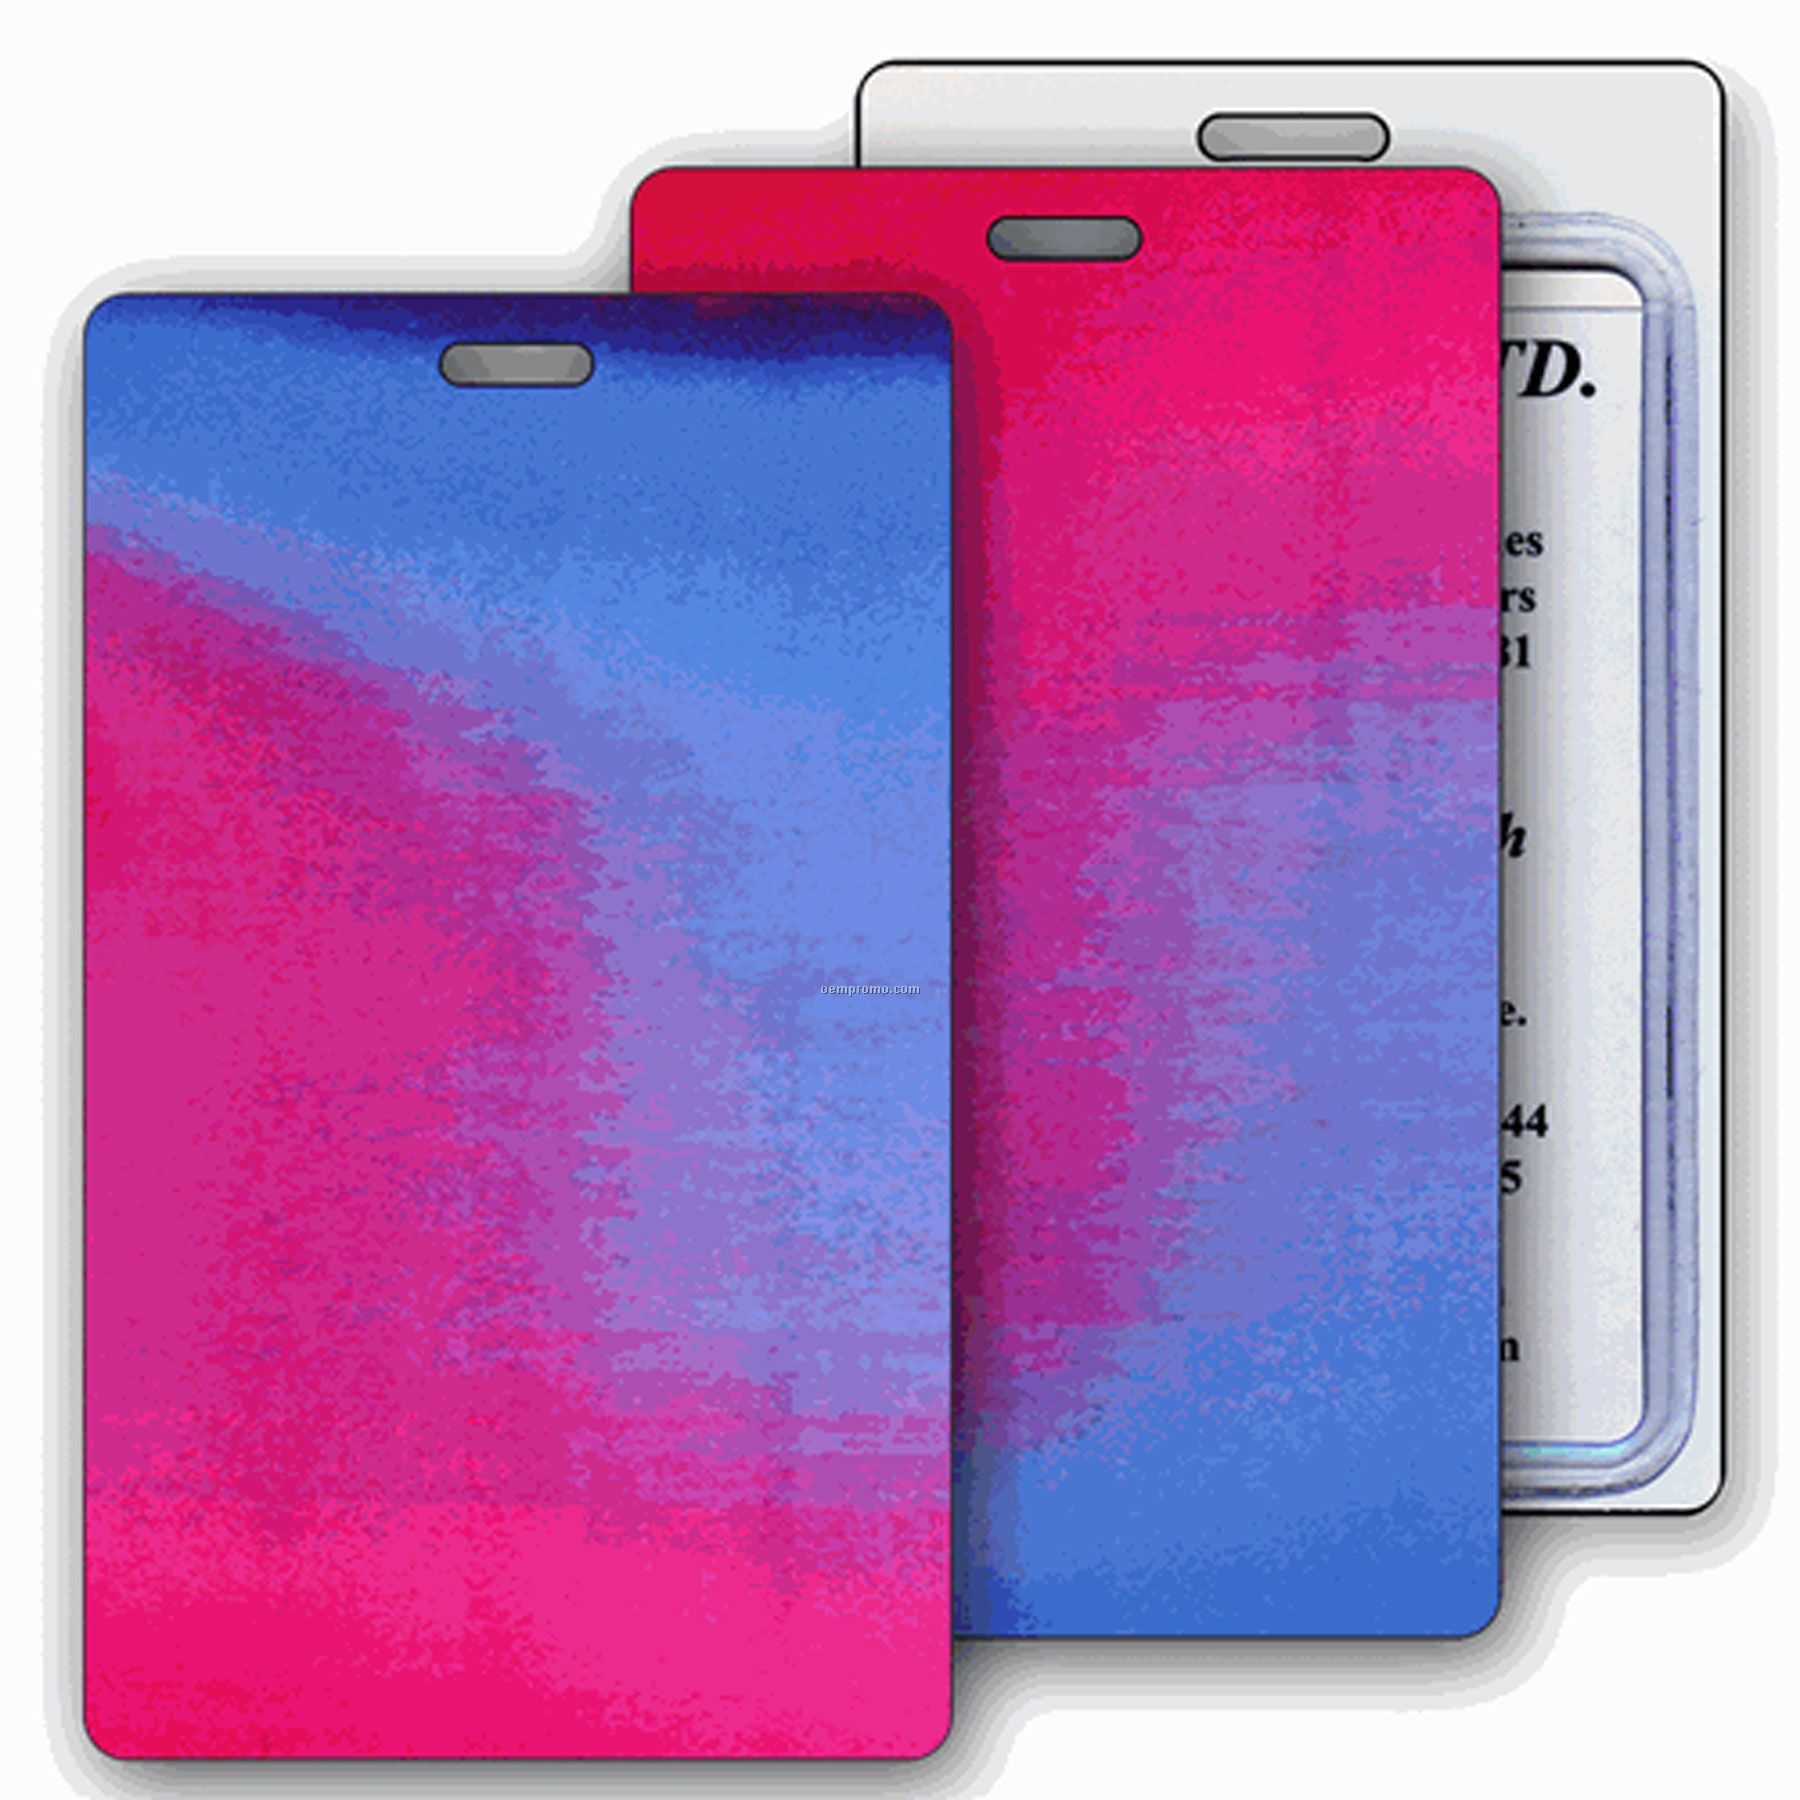 Purple/Blue/Pink 3d Lenticular Luggage Tags (Stock)